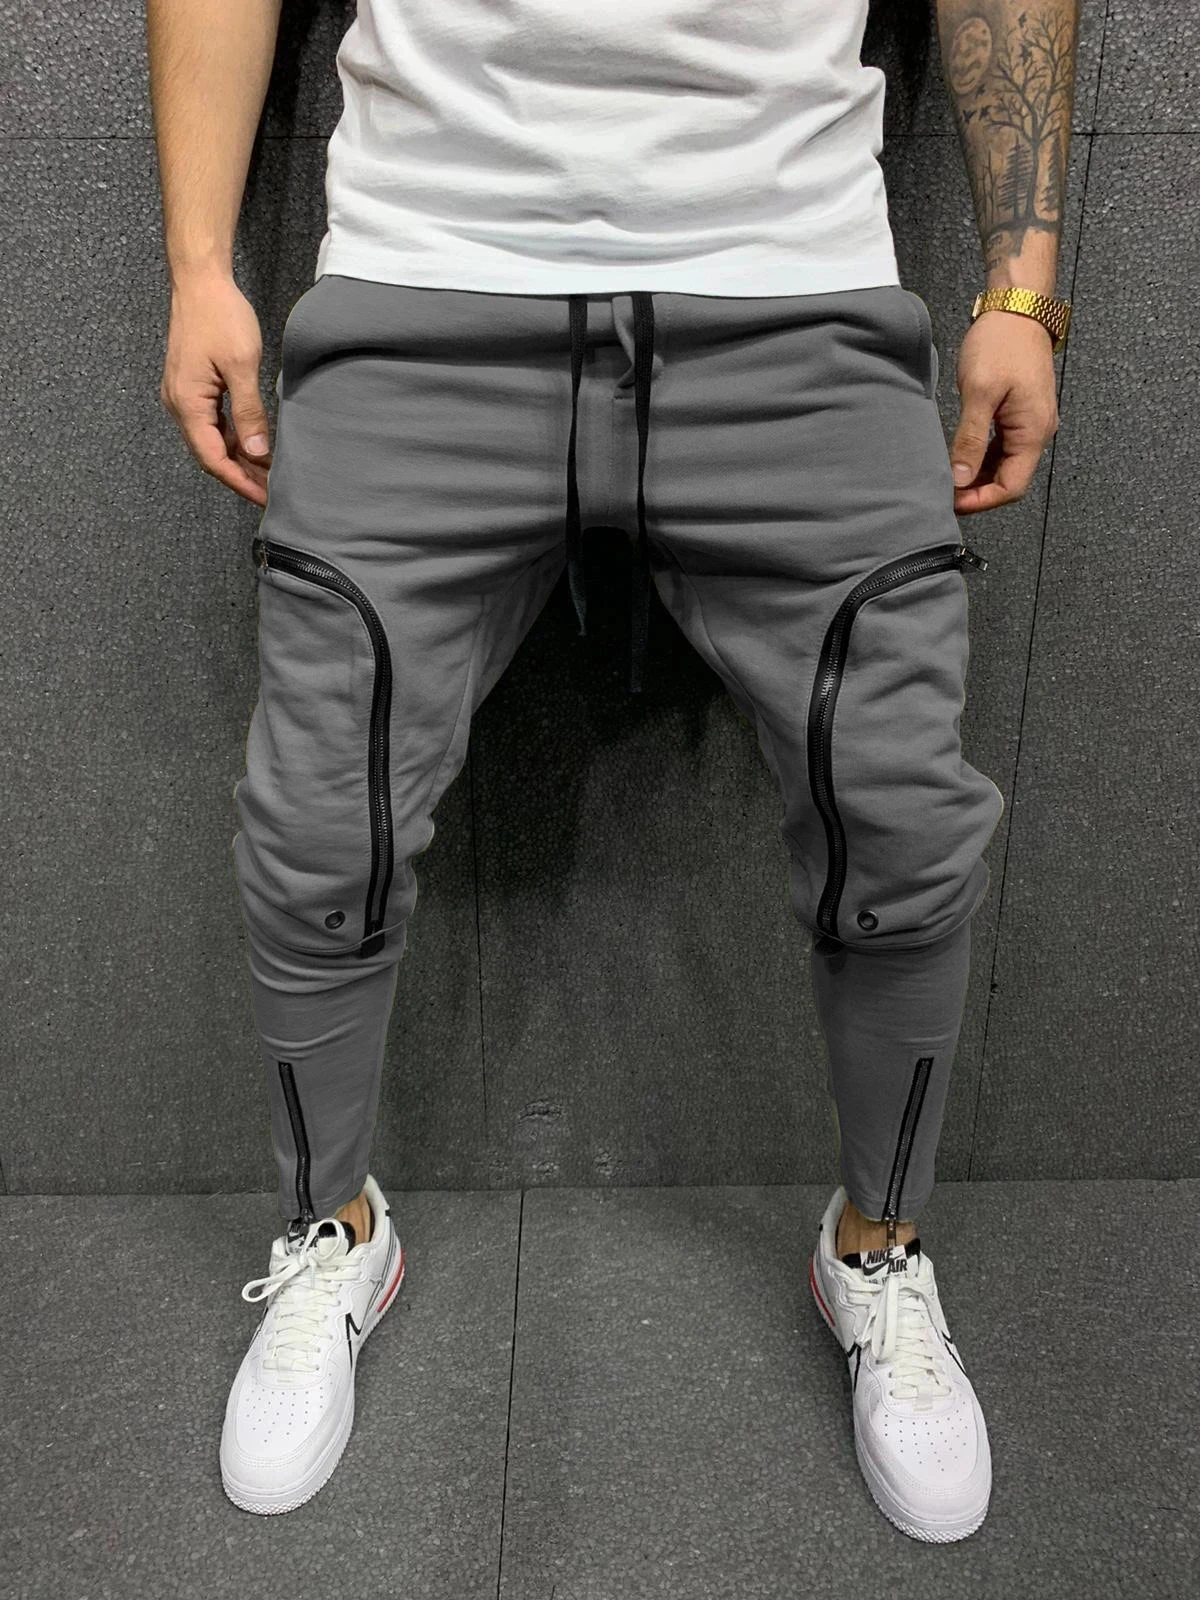 

2022 Hot Selling Men's Foreign Trade New Slim Personality Leisure Sports Pants Jogger Fashion Men's Track Pants Long Sweatpants